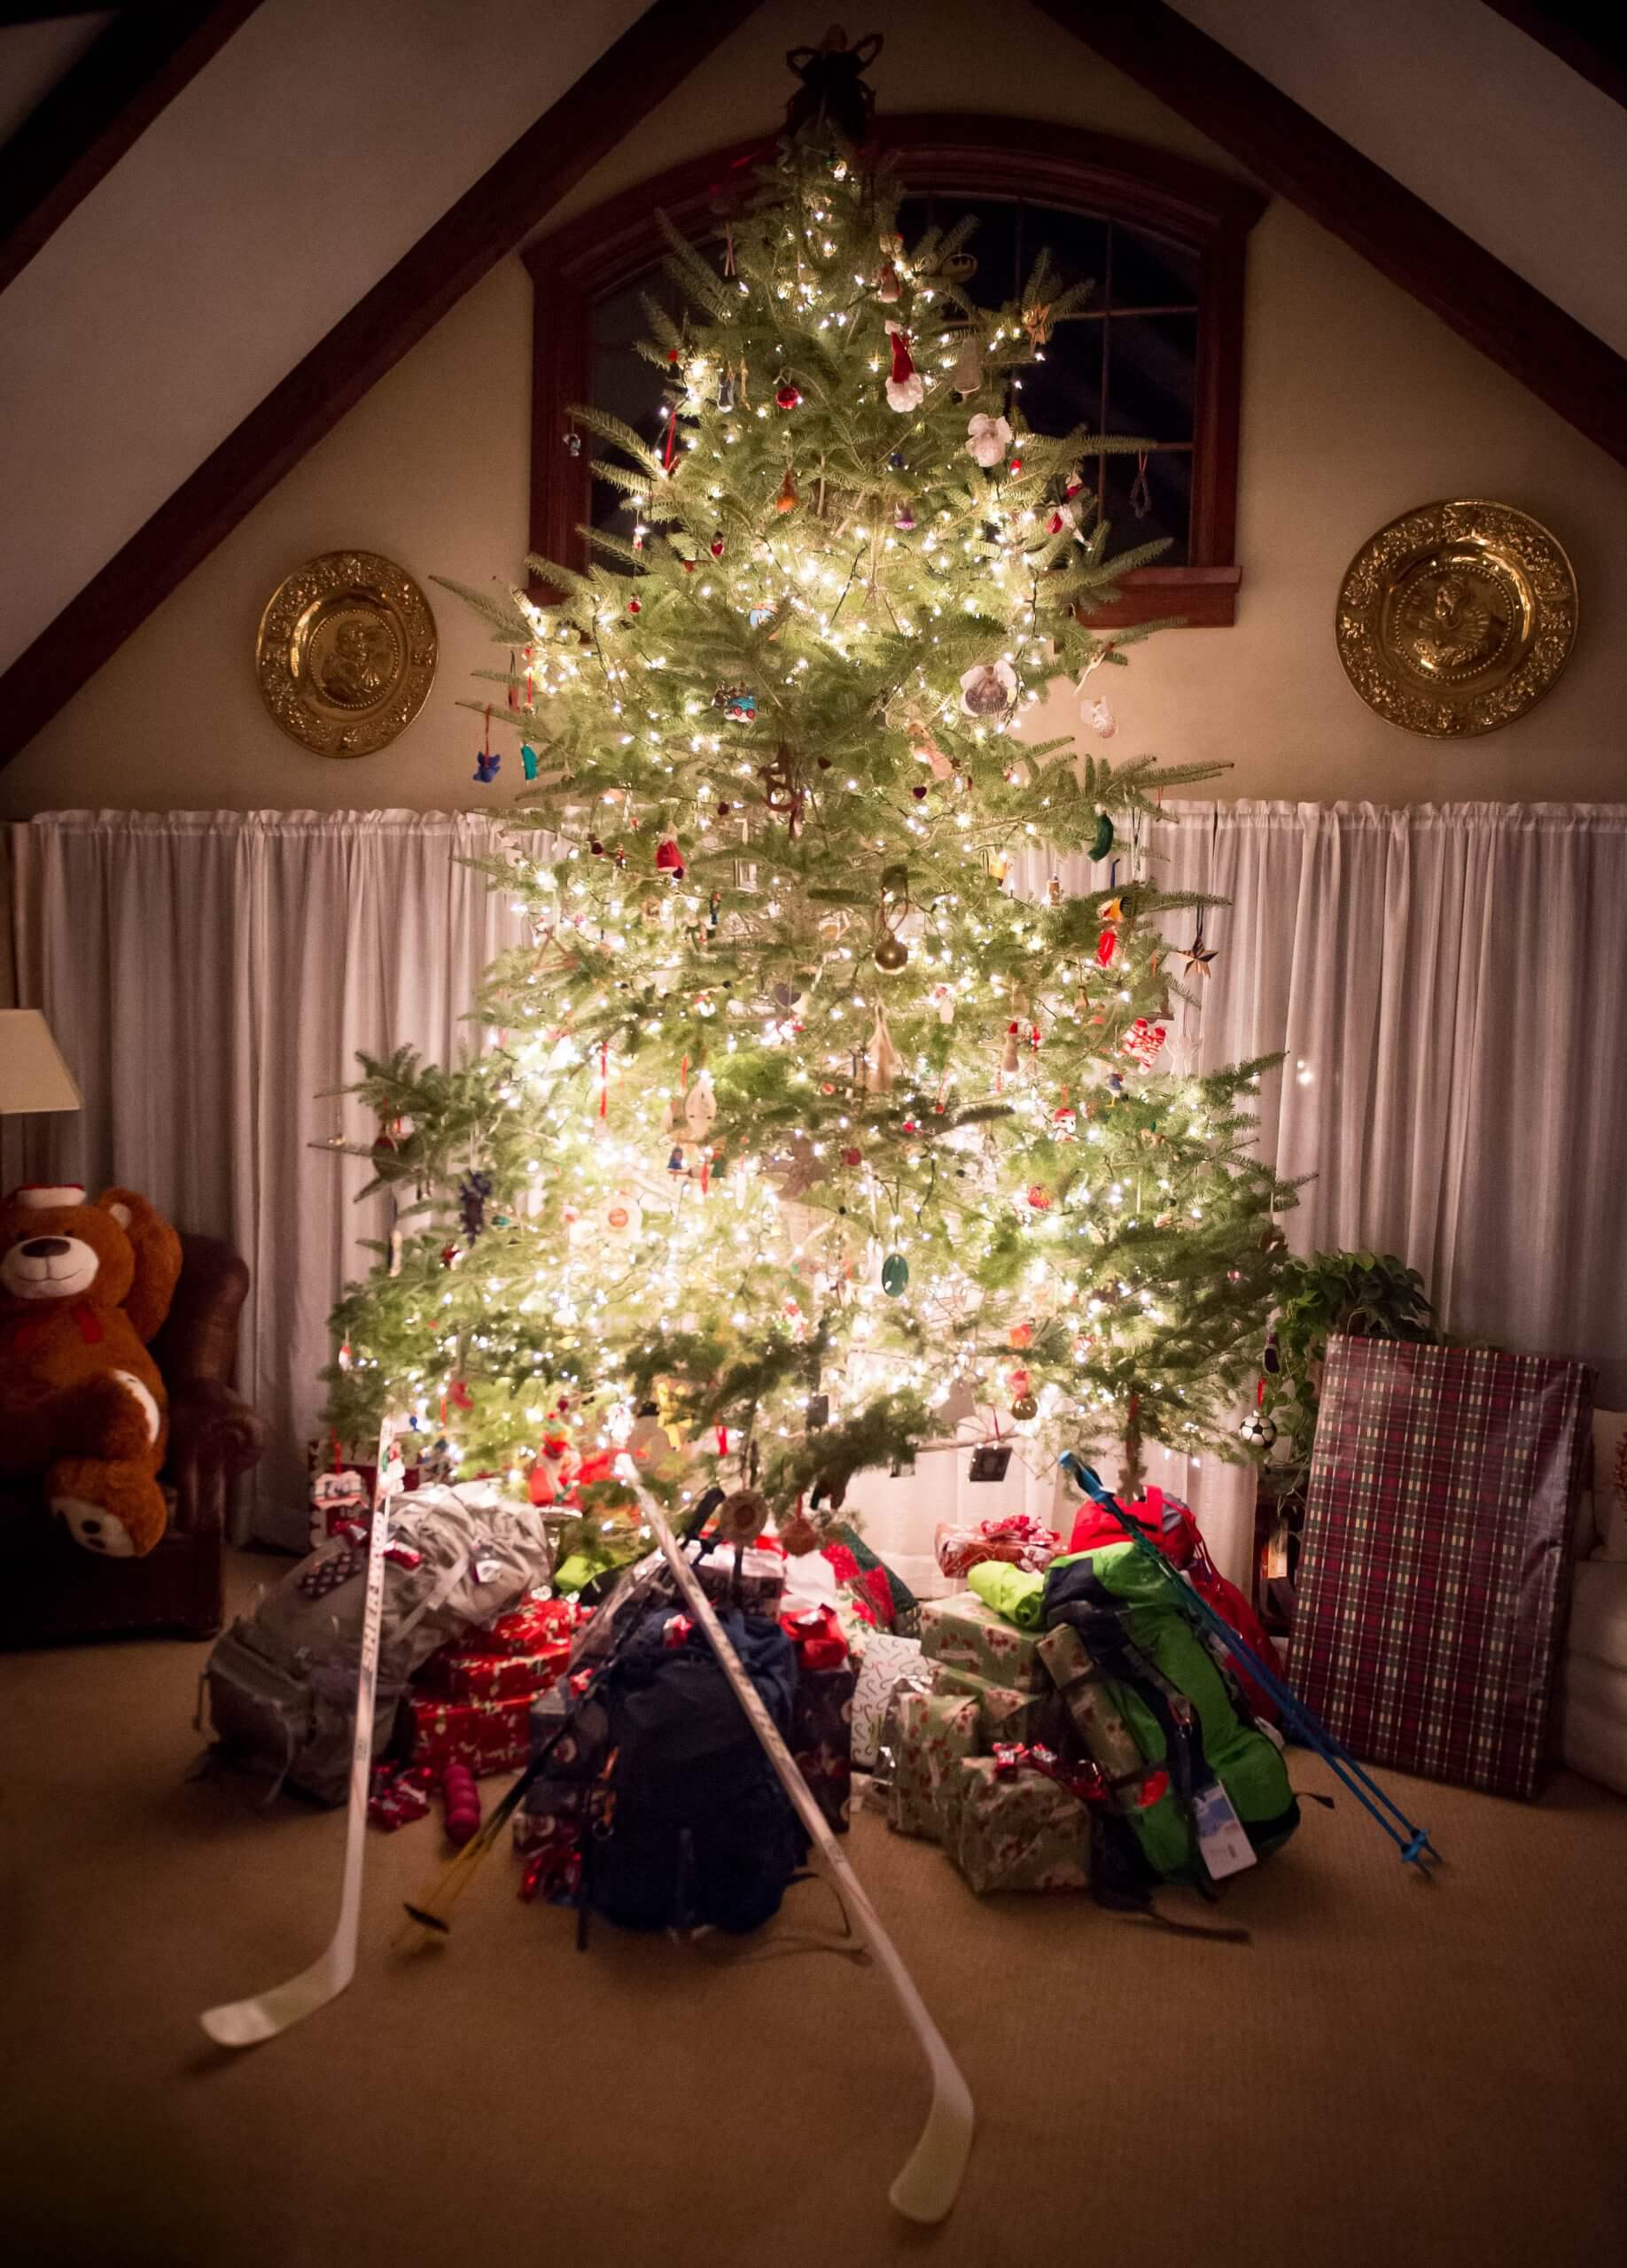 An evergreen Christmas tree is decorated with lights and ornaments. Below the tree are many gifts.